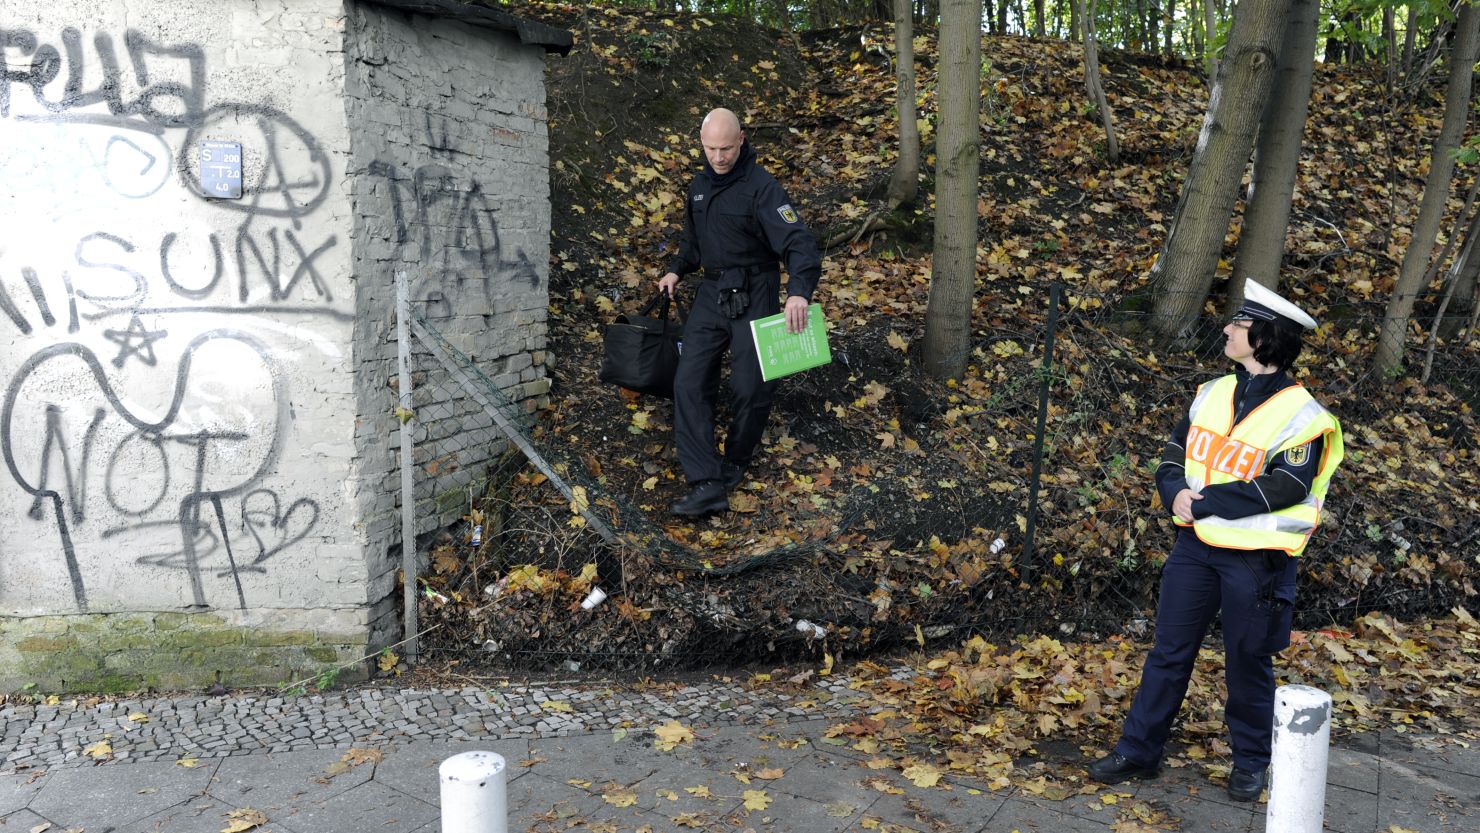 A policeman carries a bag after searching for evidence at a place where flammable devices were found.  